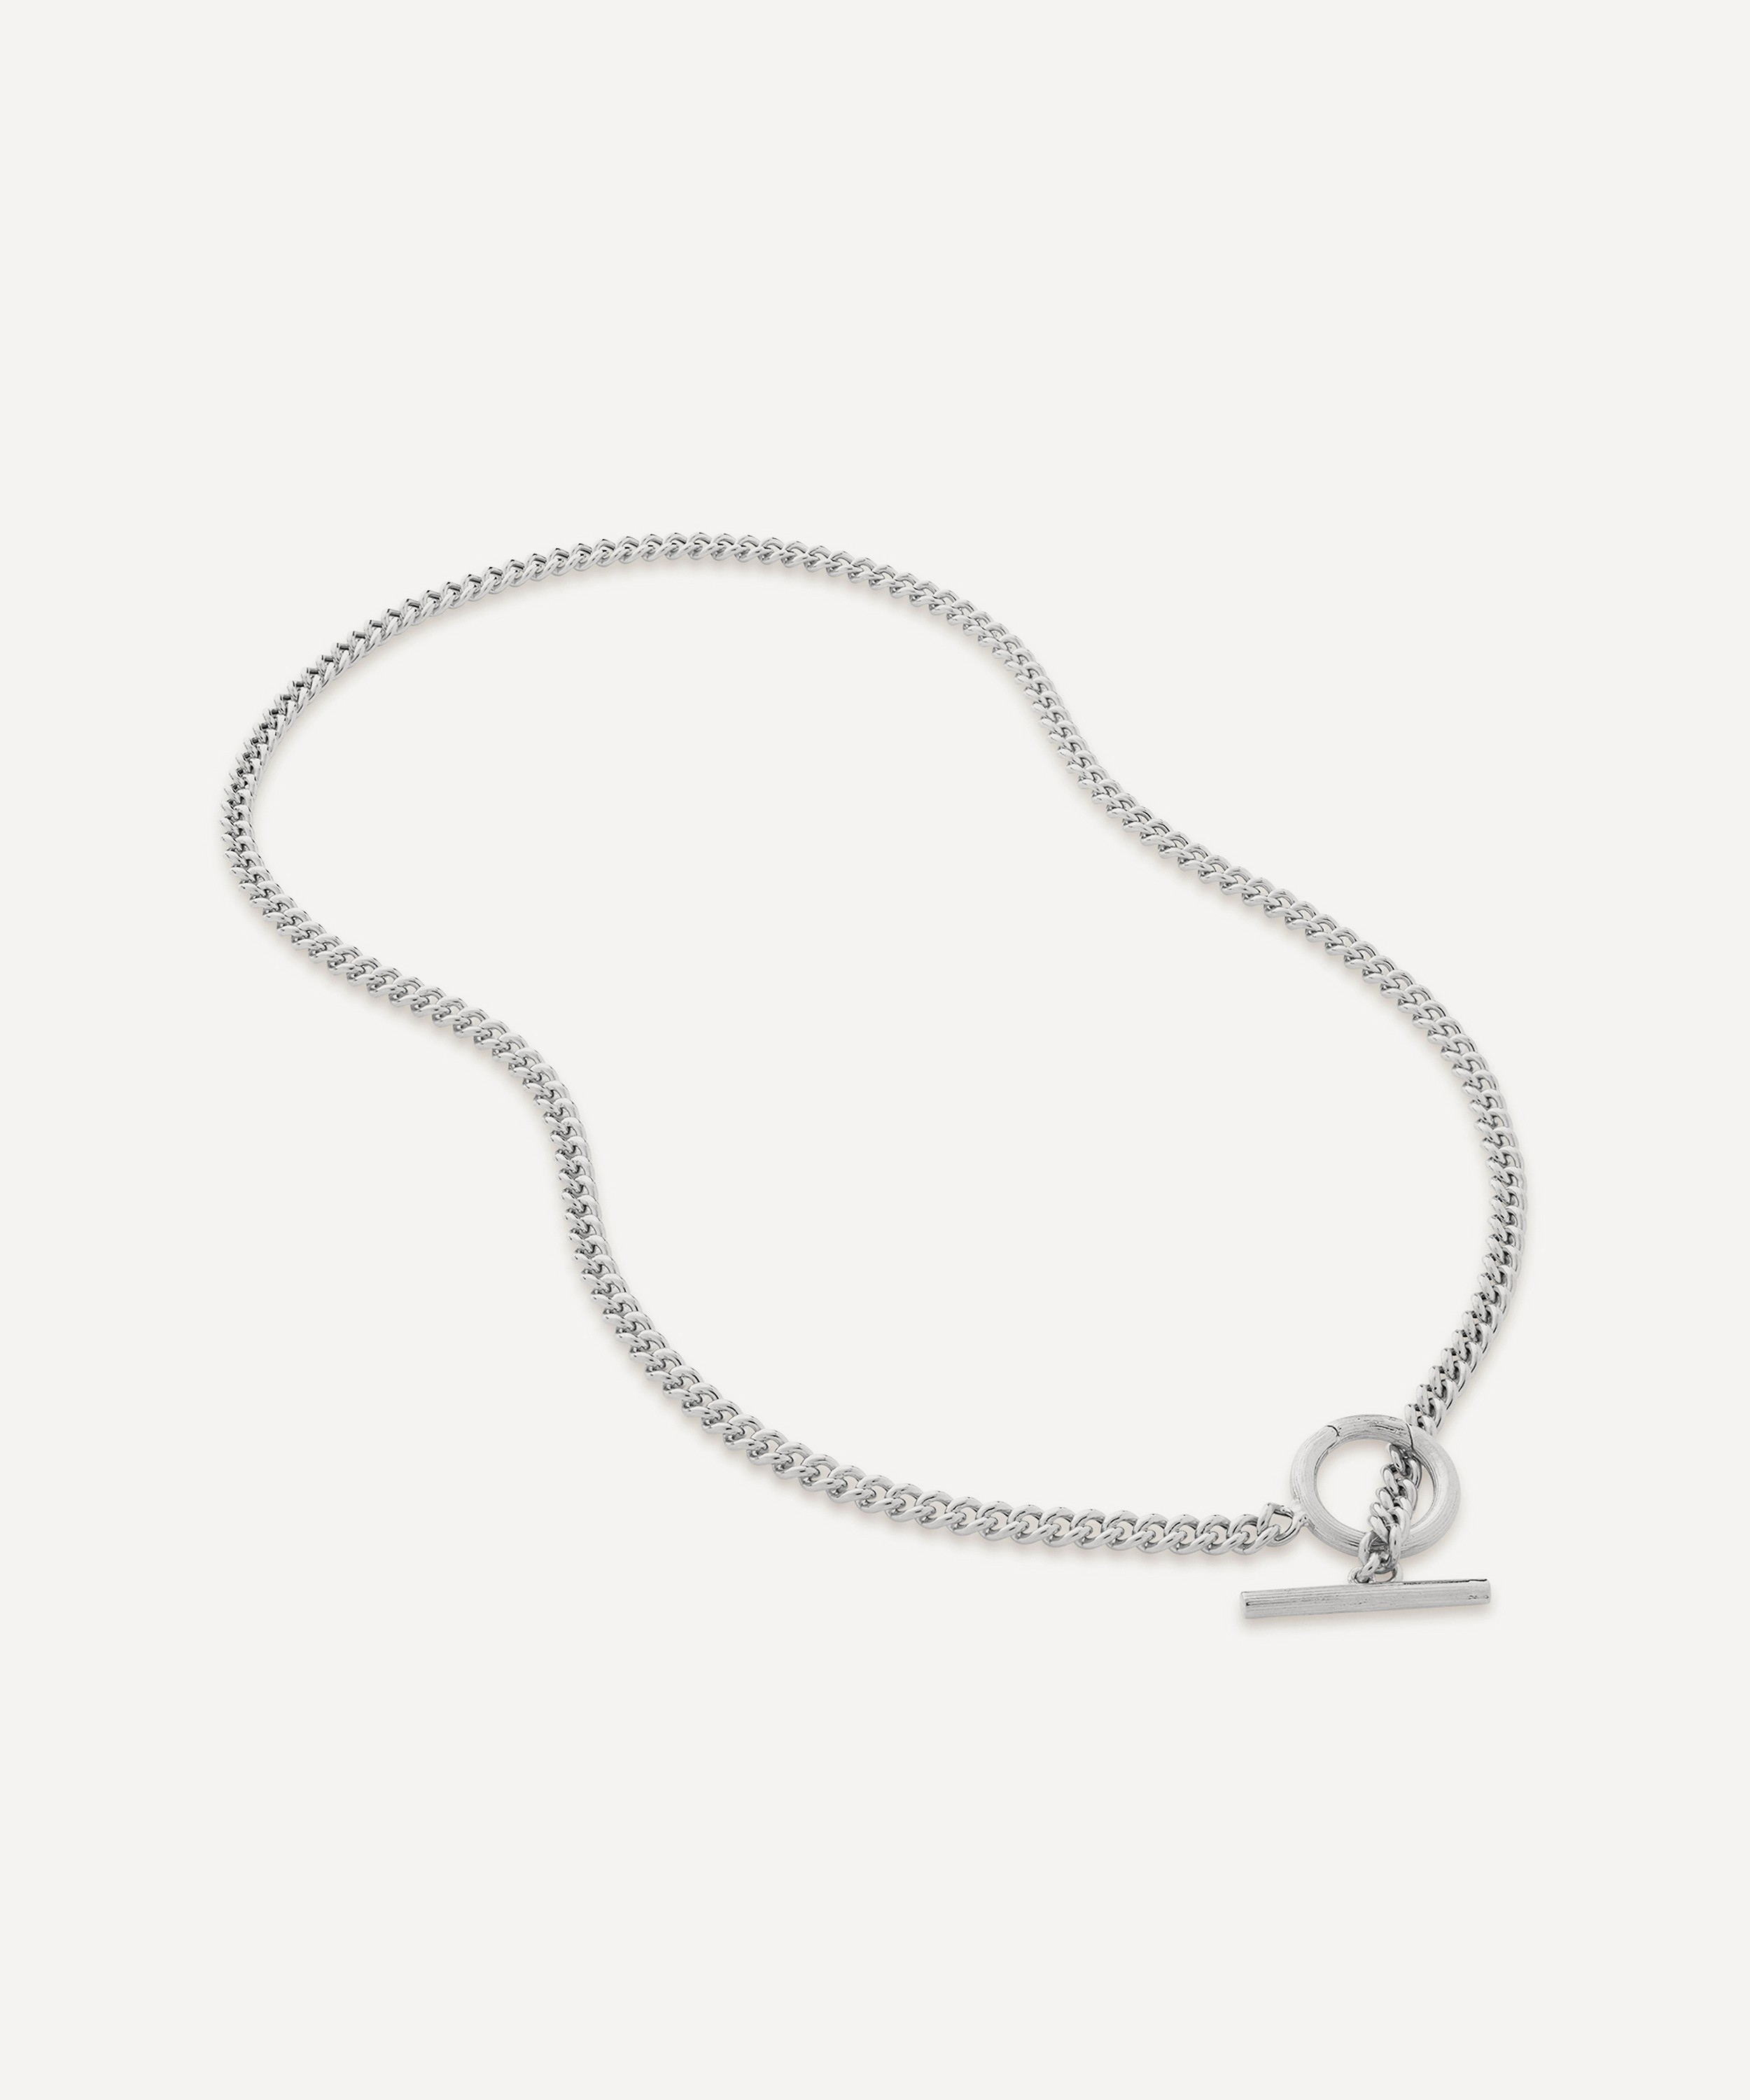 Monica Vinader Groove Curb Chain Necklace